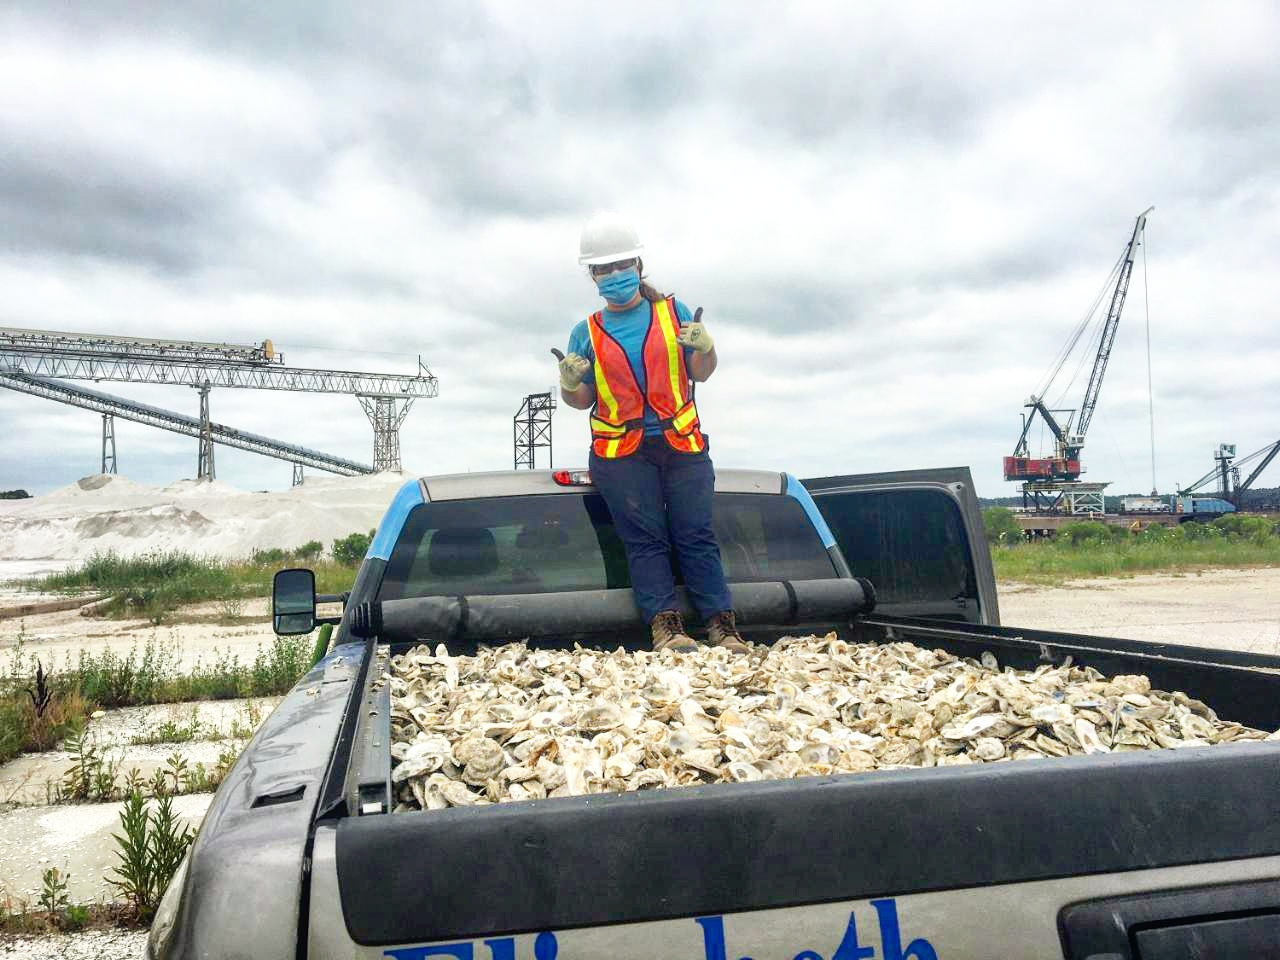  A person in a hard hat and an orange vest standing in a truck bed filled with oysters.